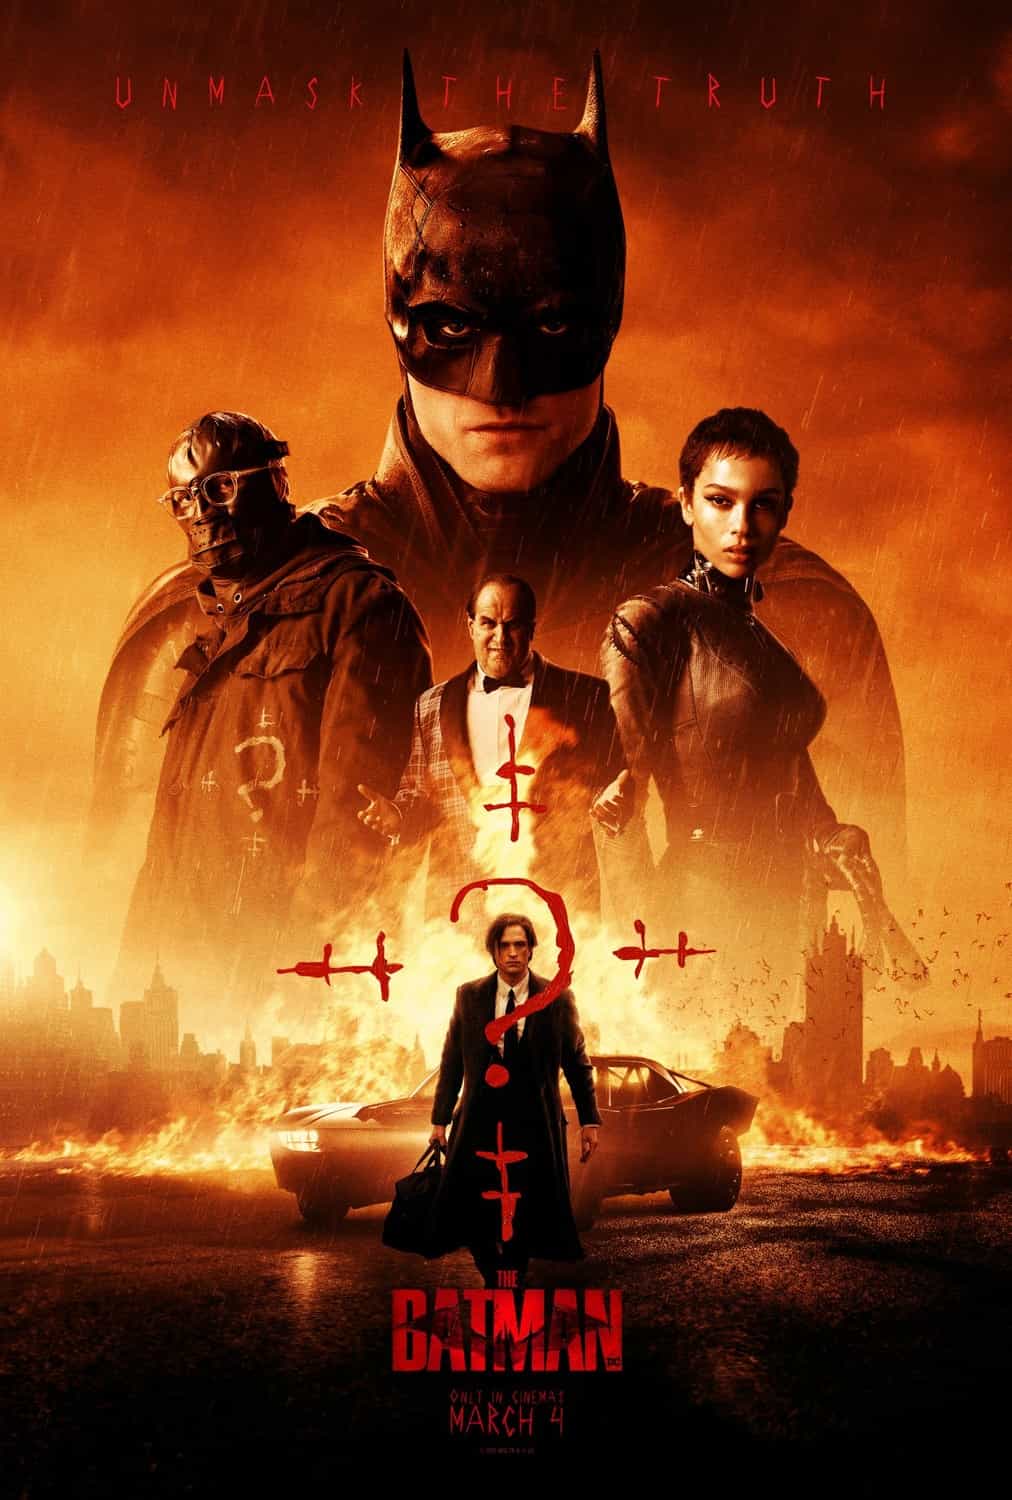 UK Box Office Figures 25th - 27th March 2022: Four weeks at the top for The Batman as Indian movie RRR makes its debut at number 2